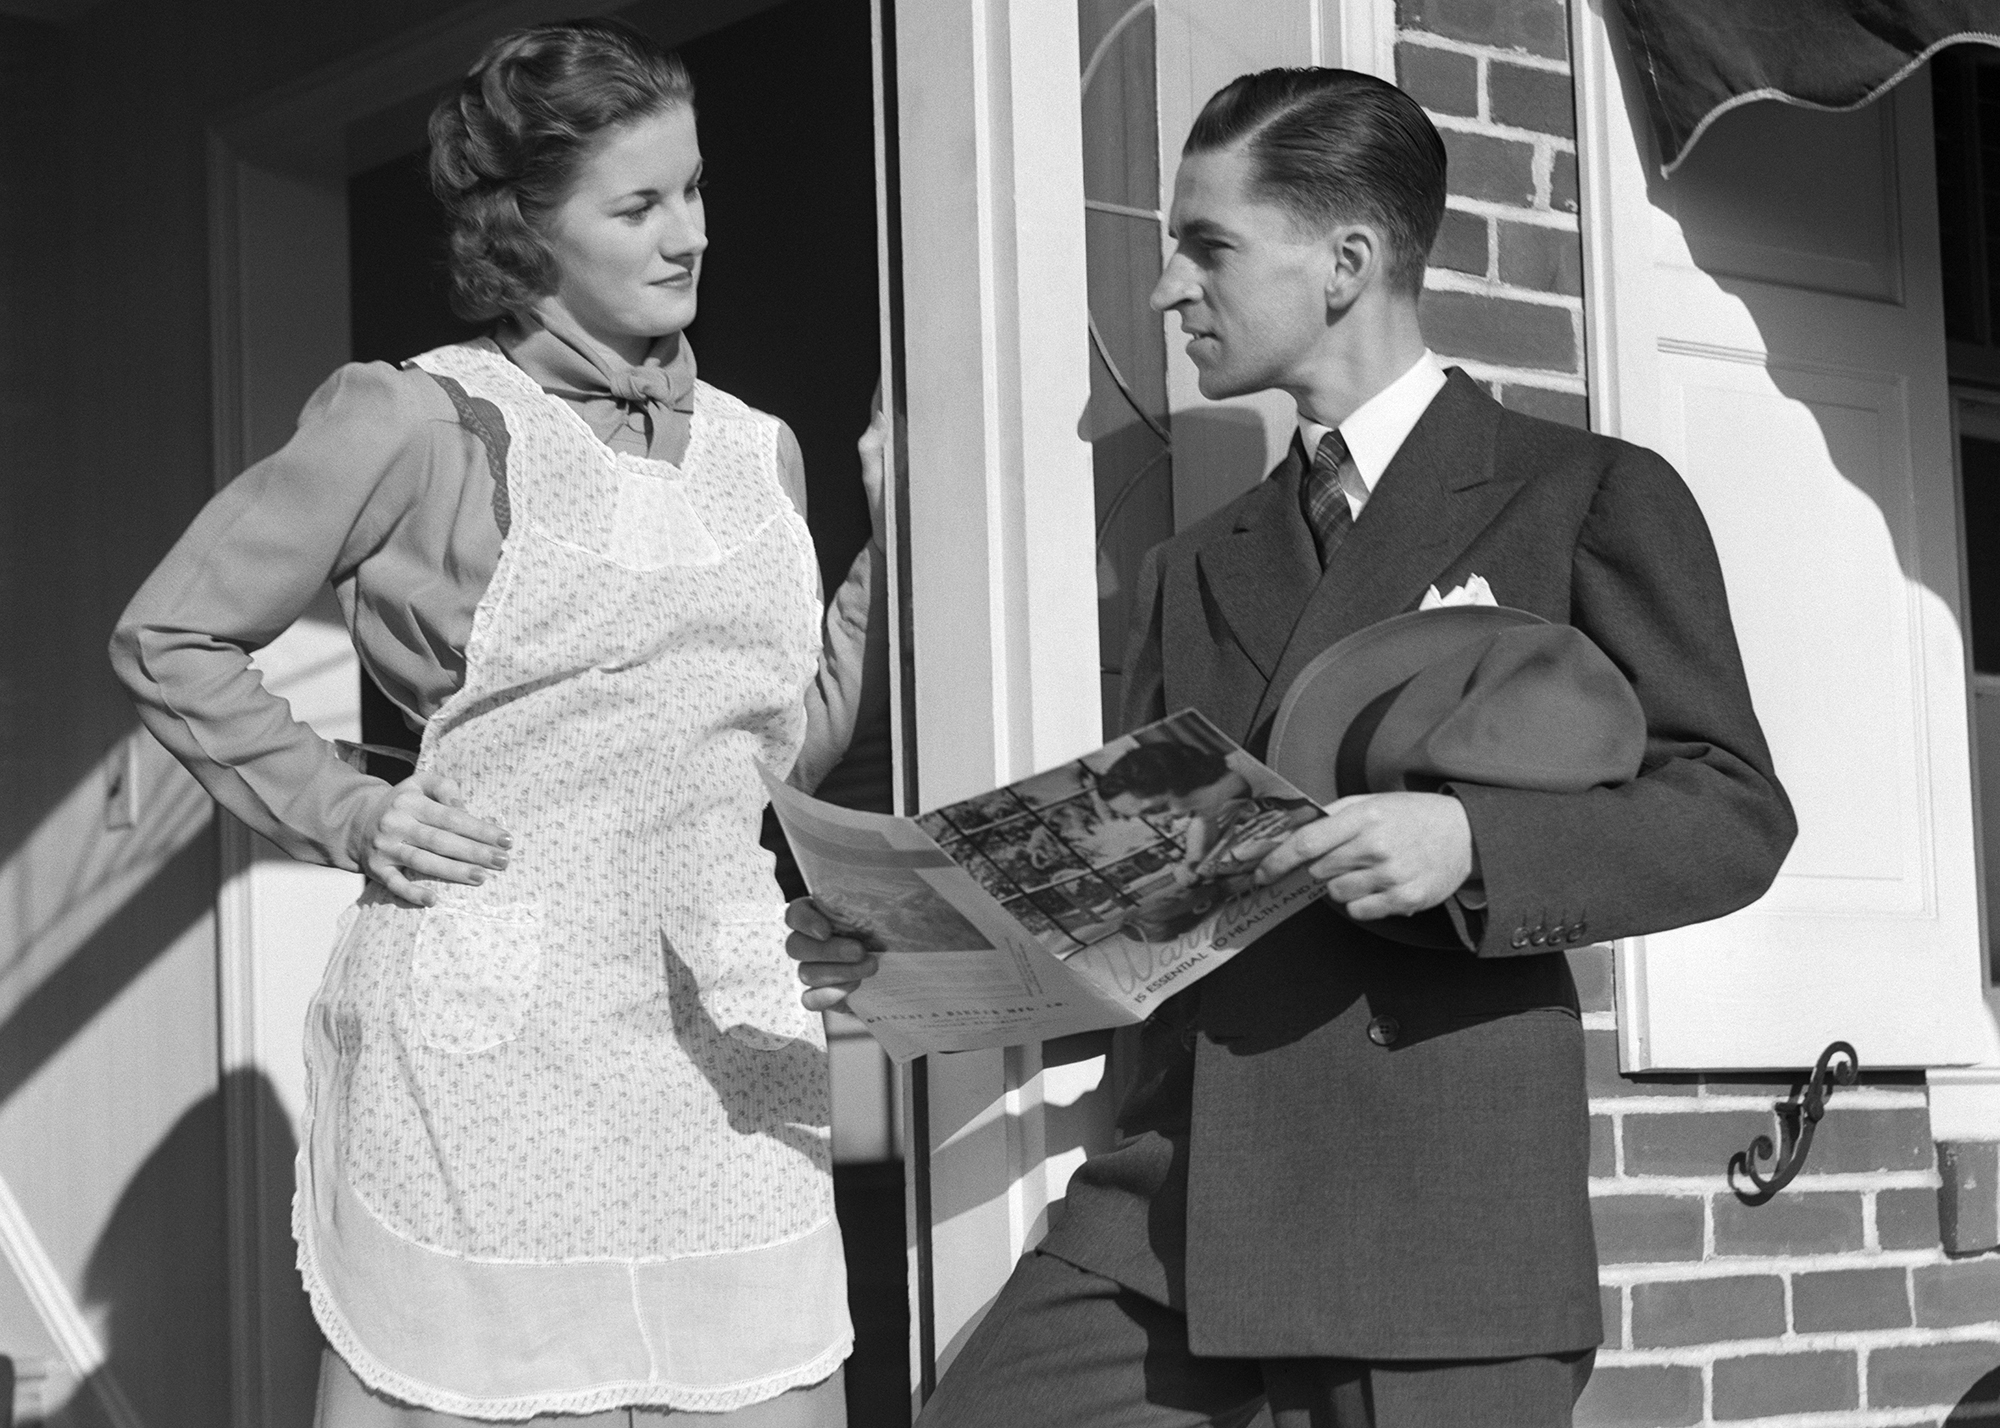 A salesman talks to a homeowner at her front door. He shows her a catalog. 